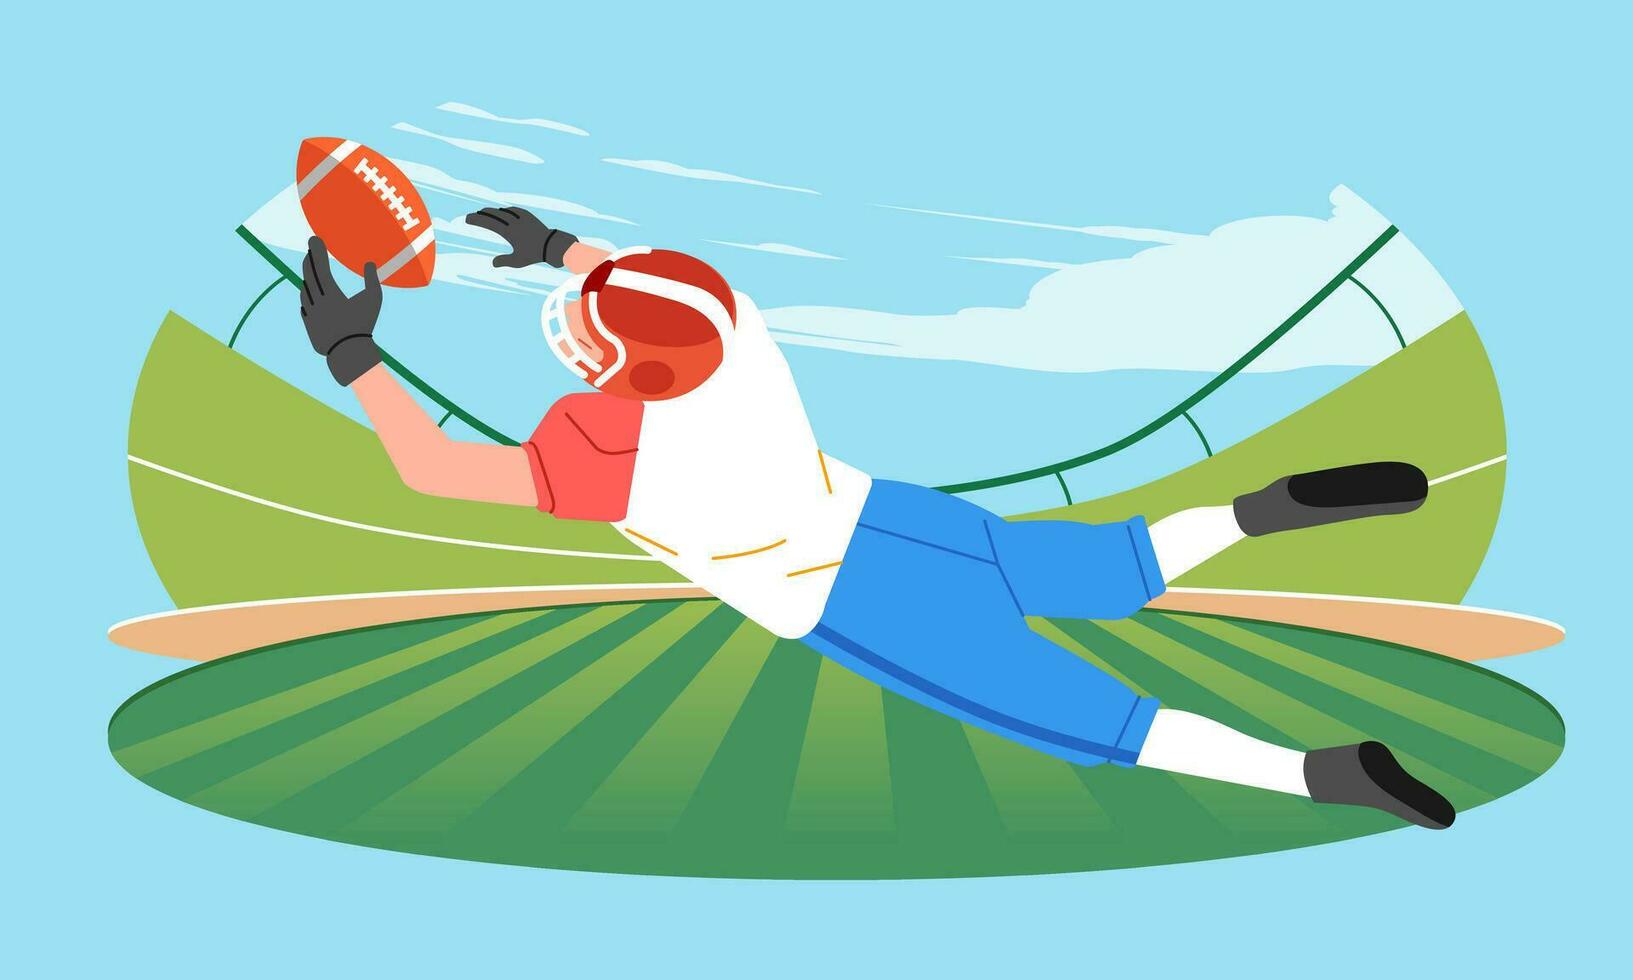 American football Player catches the ball and flies in the air on field Back view vector